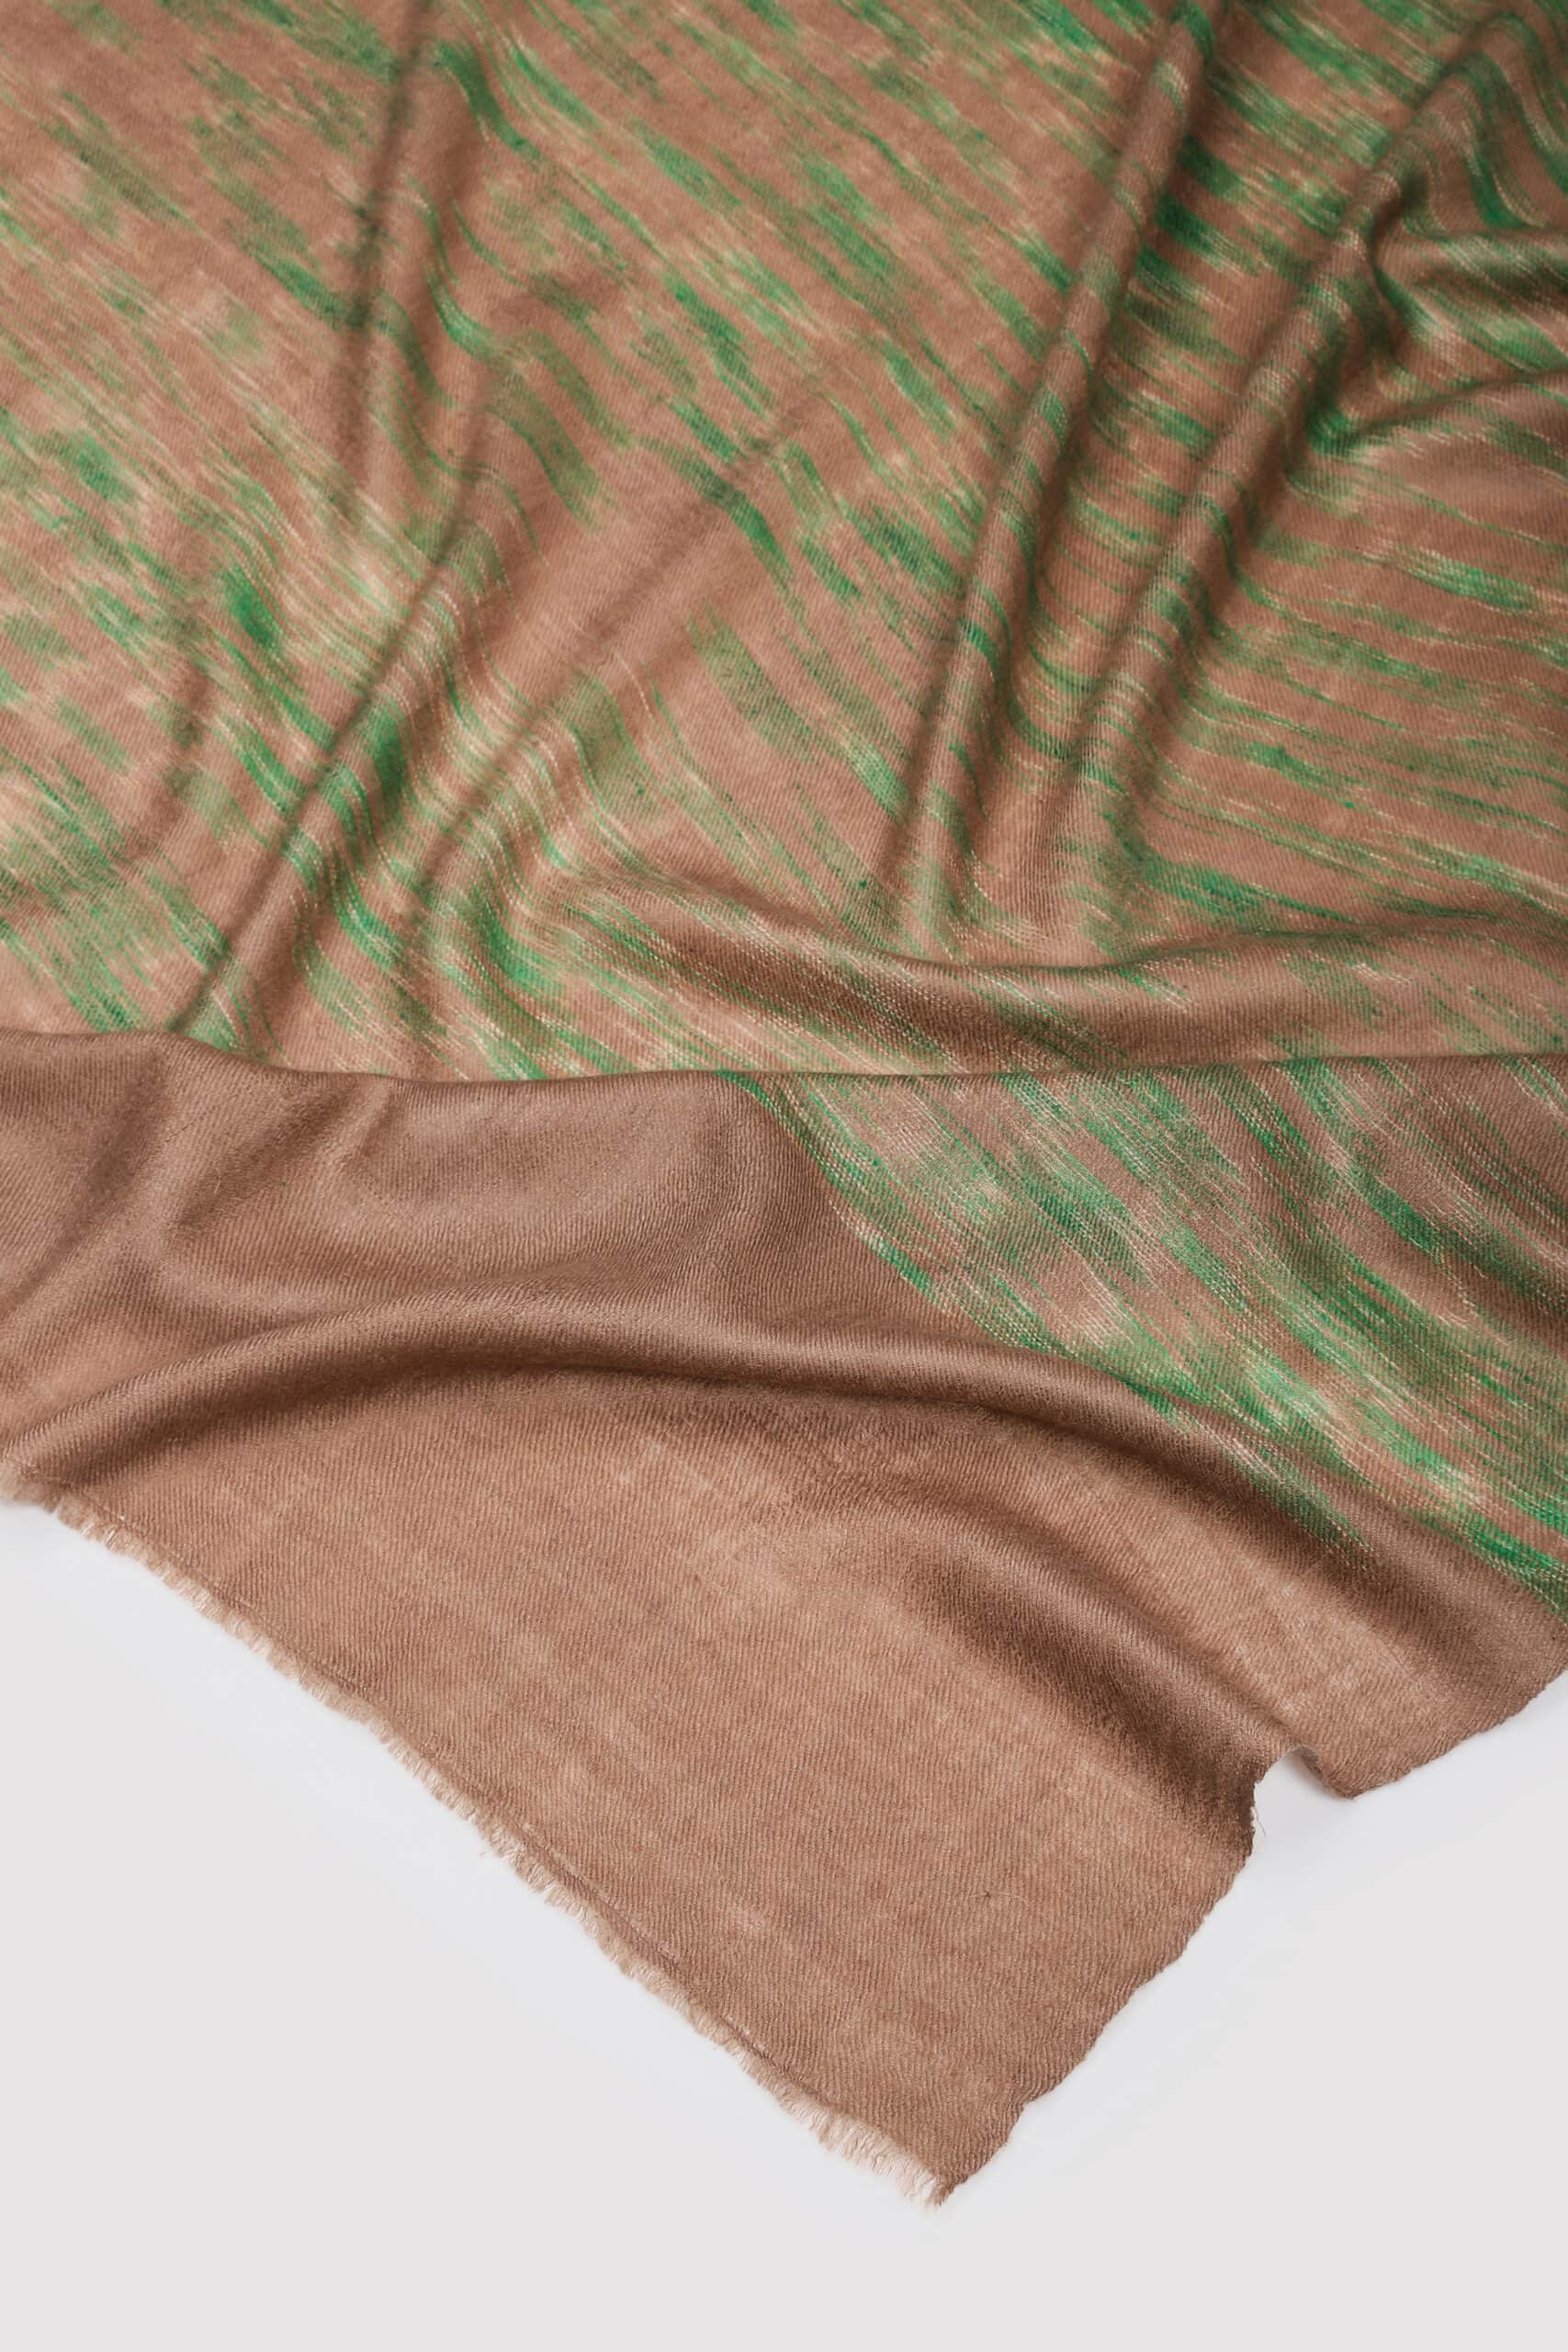 Natural brown & green colored Ikat shawl on a white background- Me & K